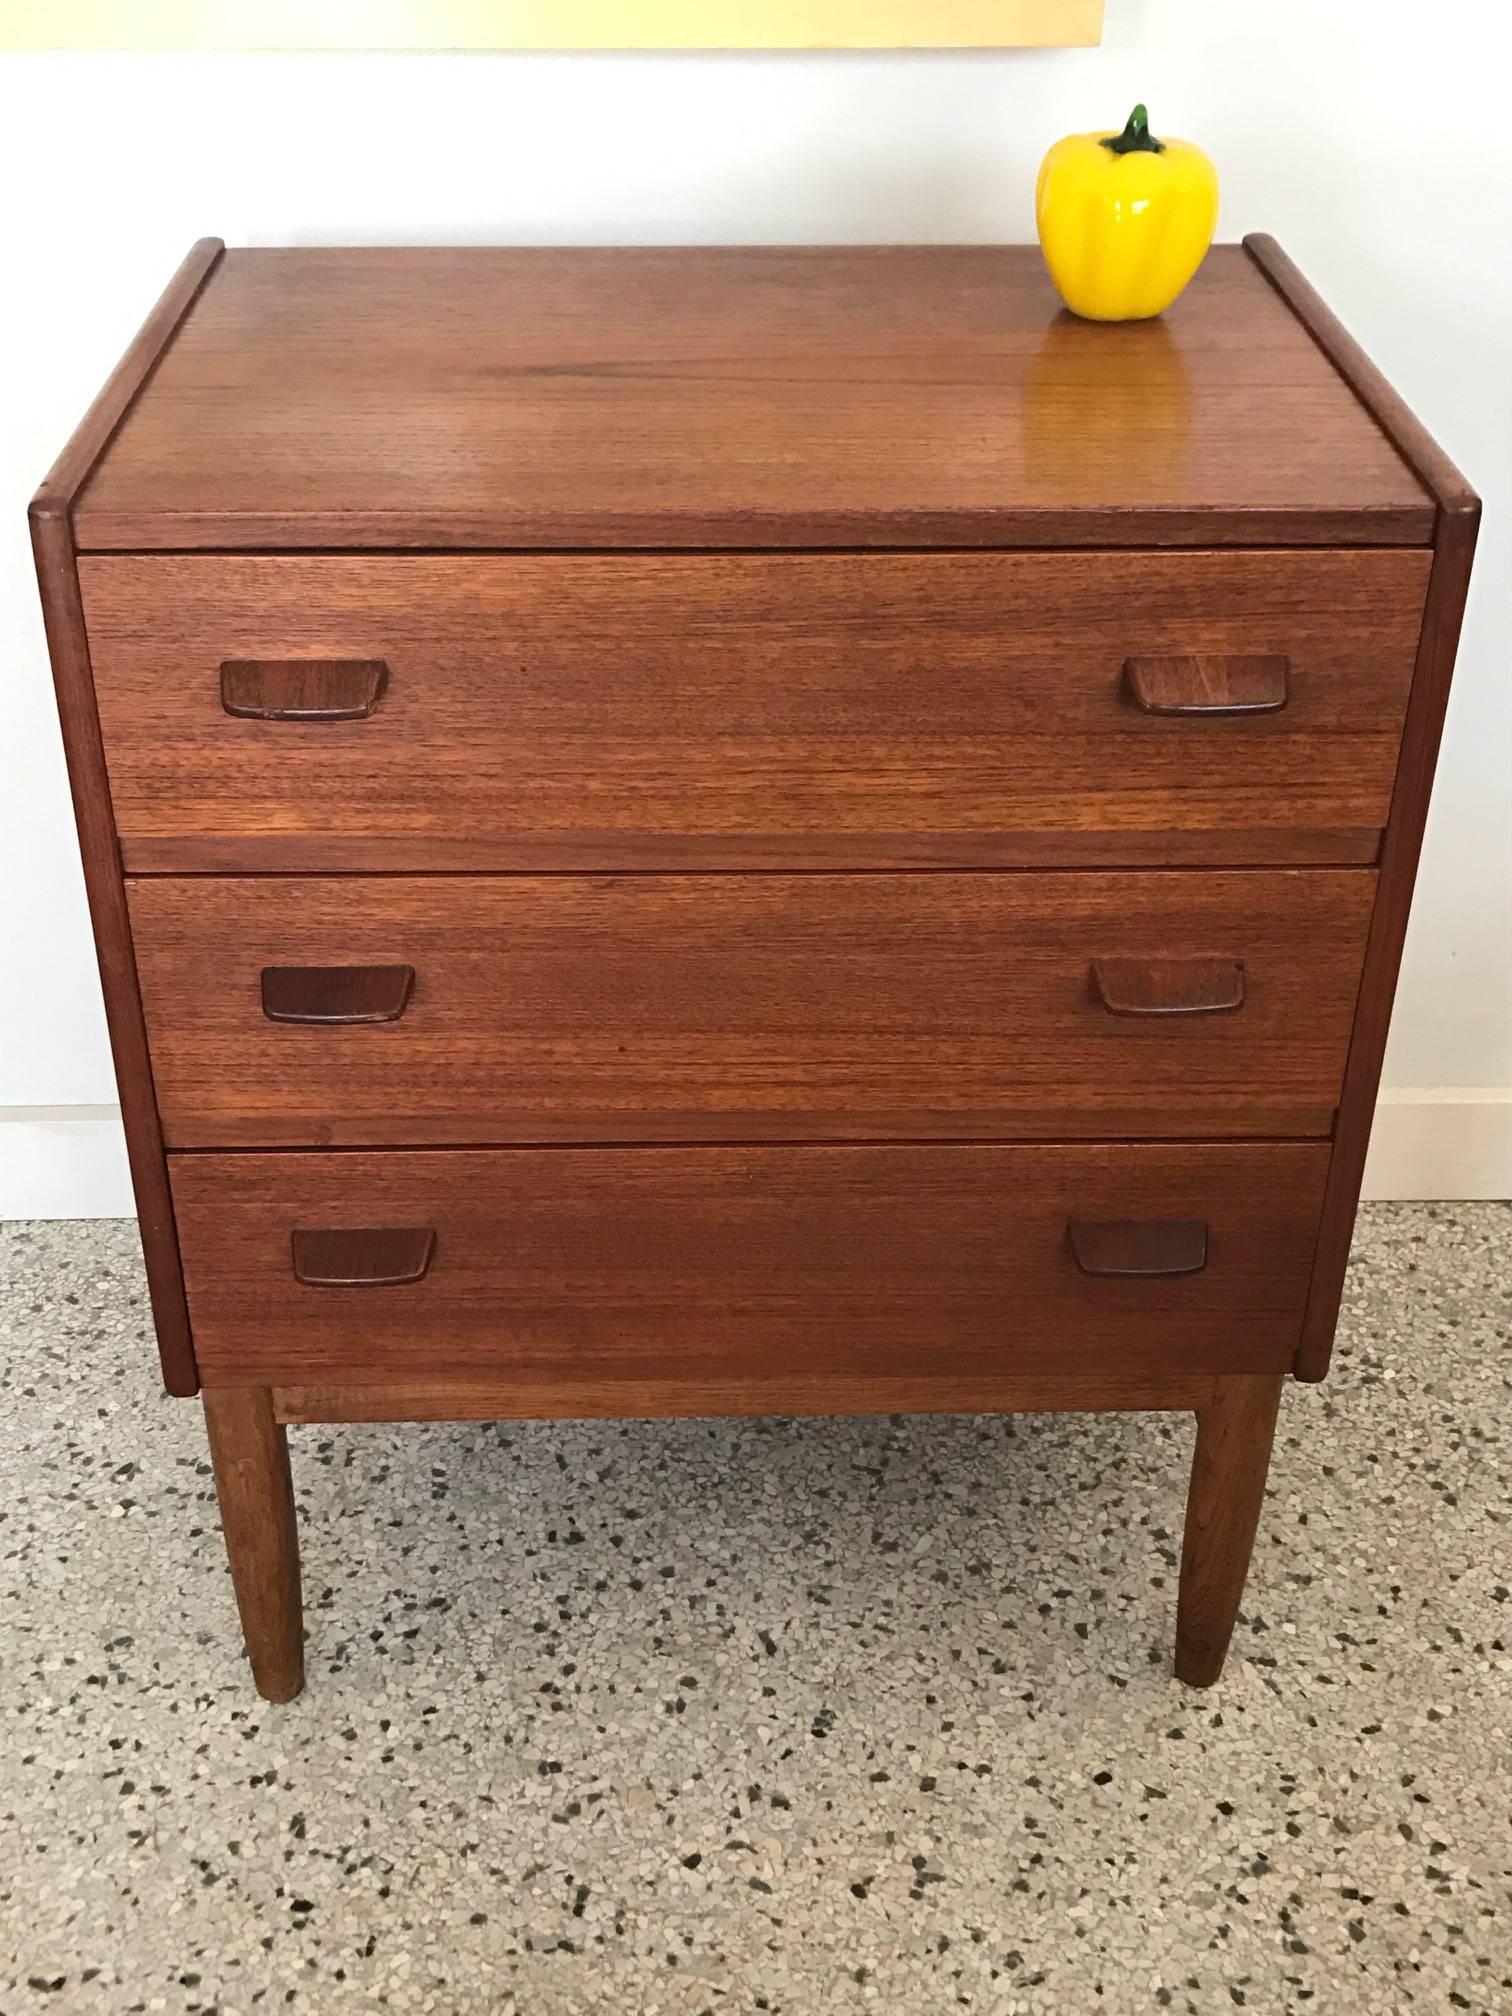 Poul M. Volther Danish small chest of drawers 1960s FDB Mobler, Denmark. Nicely with rich patina teak case, light oak base. Three drawers-ideal as a bedside chest or small storage piece.
 